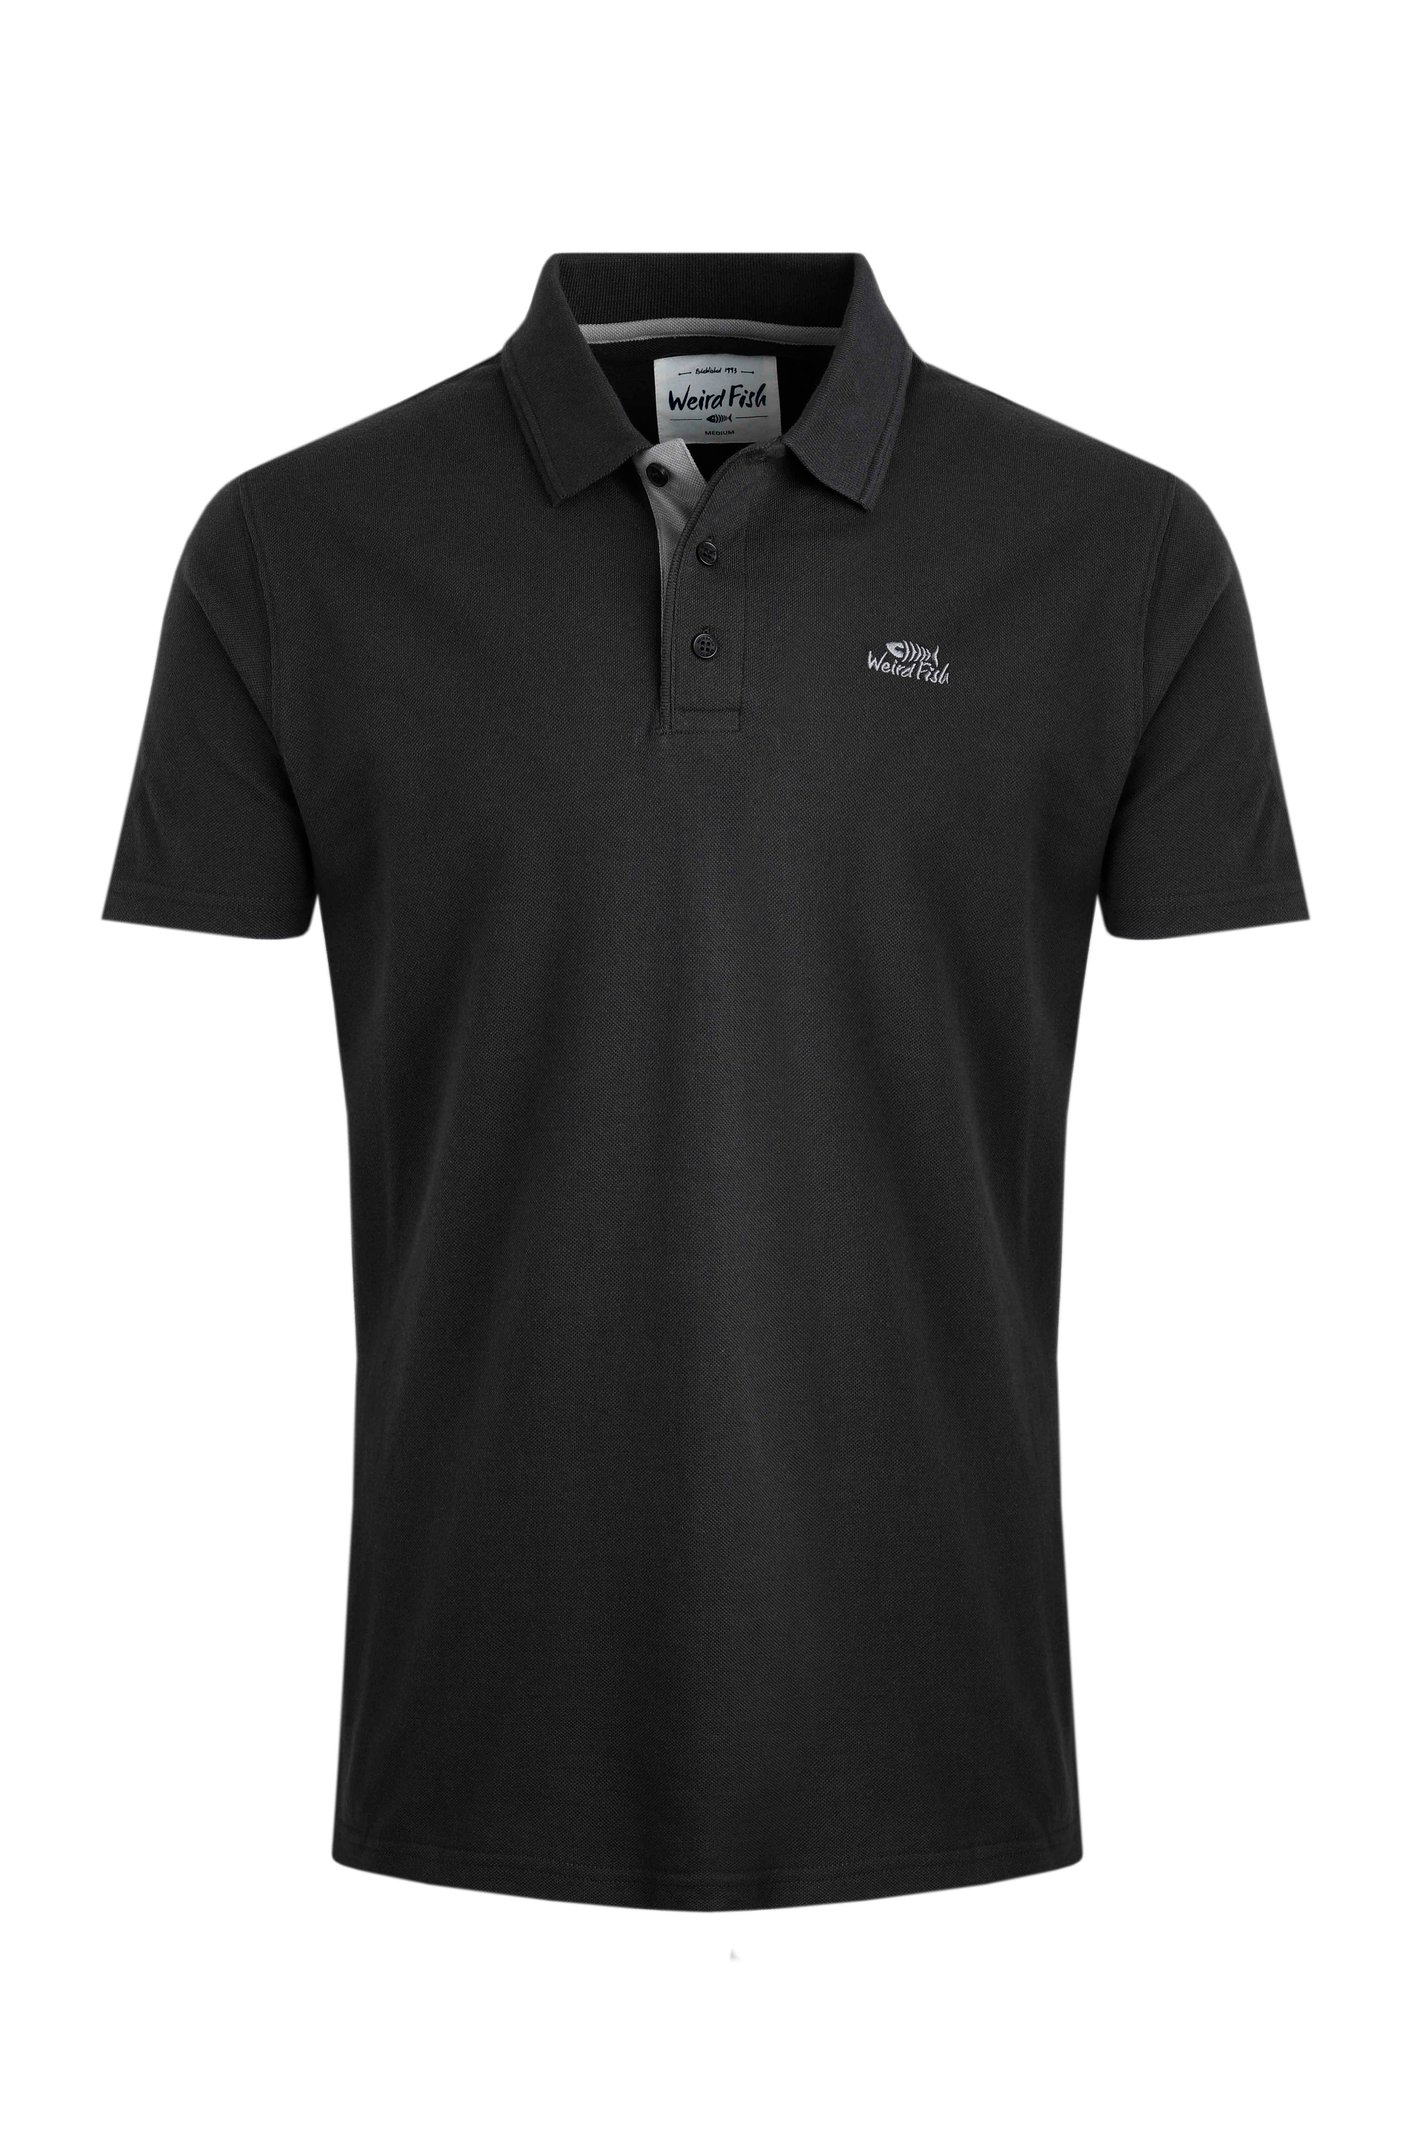 Weird Fish Miles Organic Pique Polo Washed Black Size L